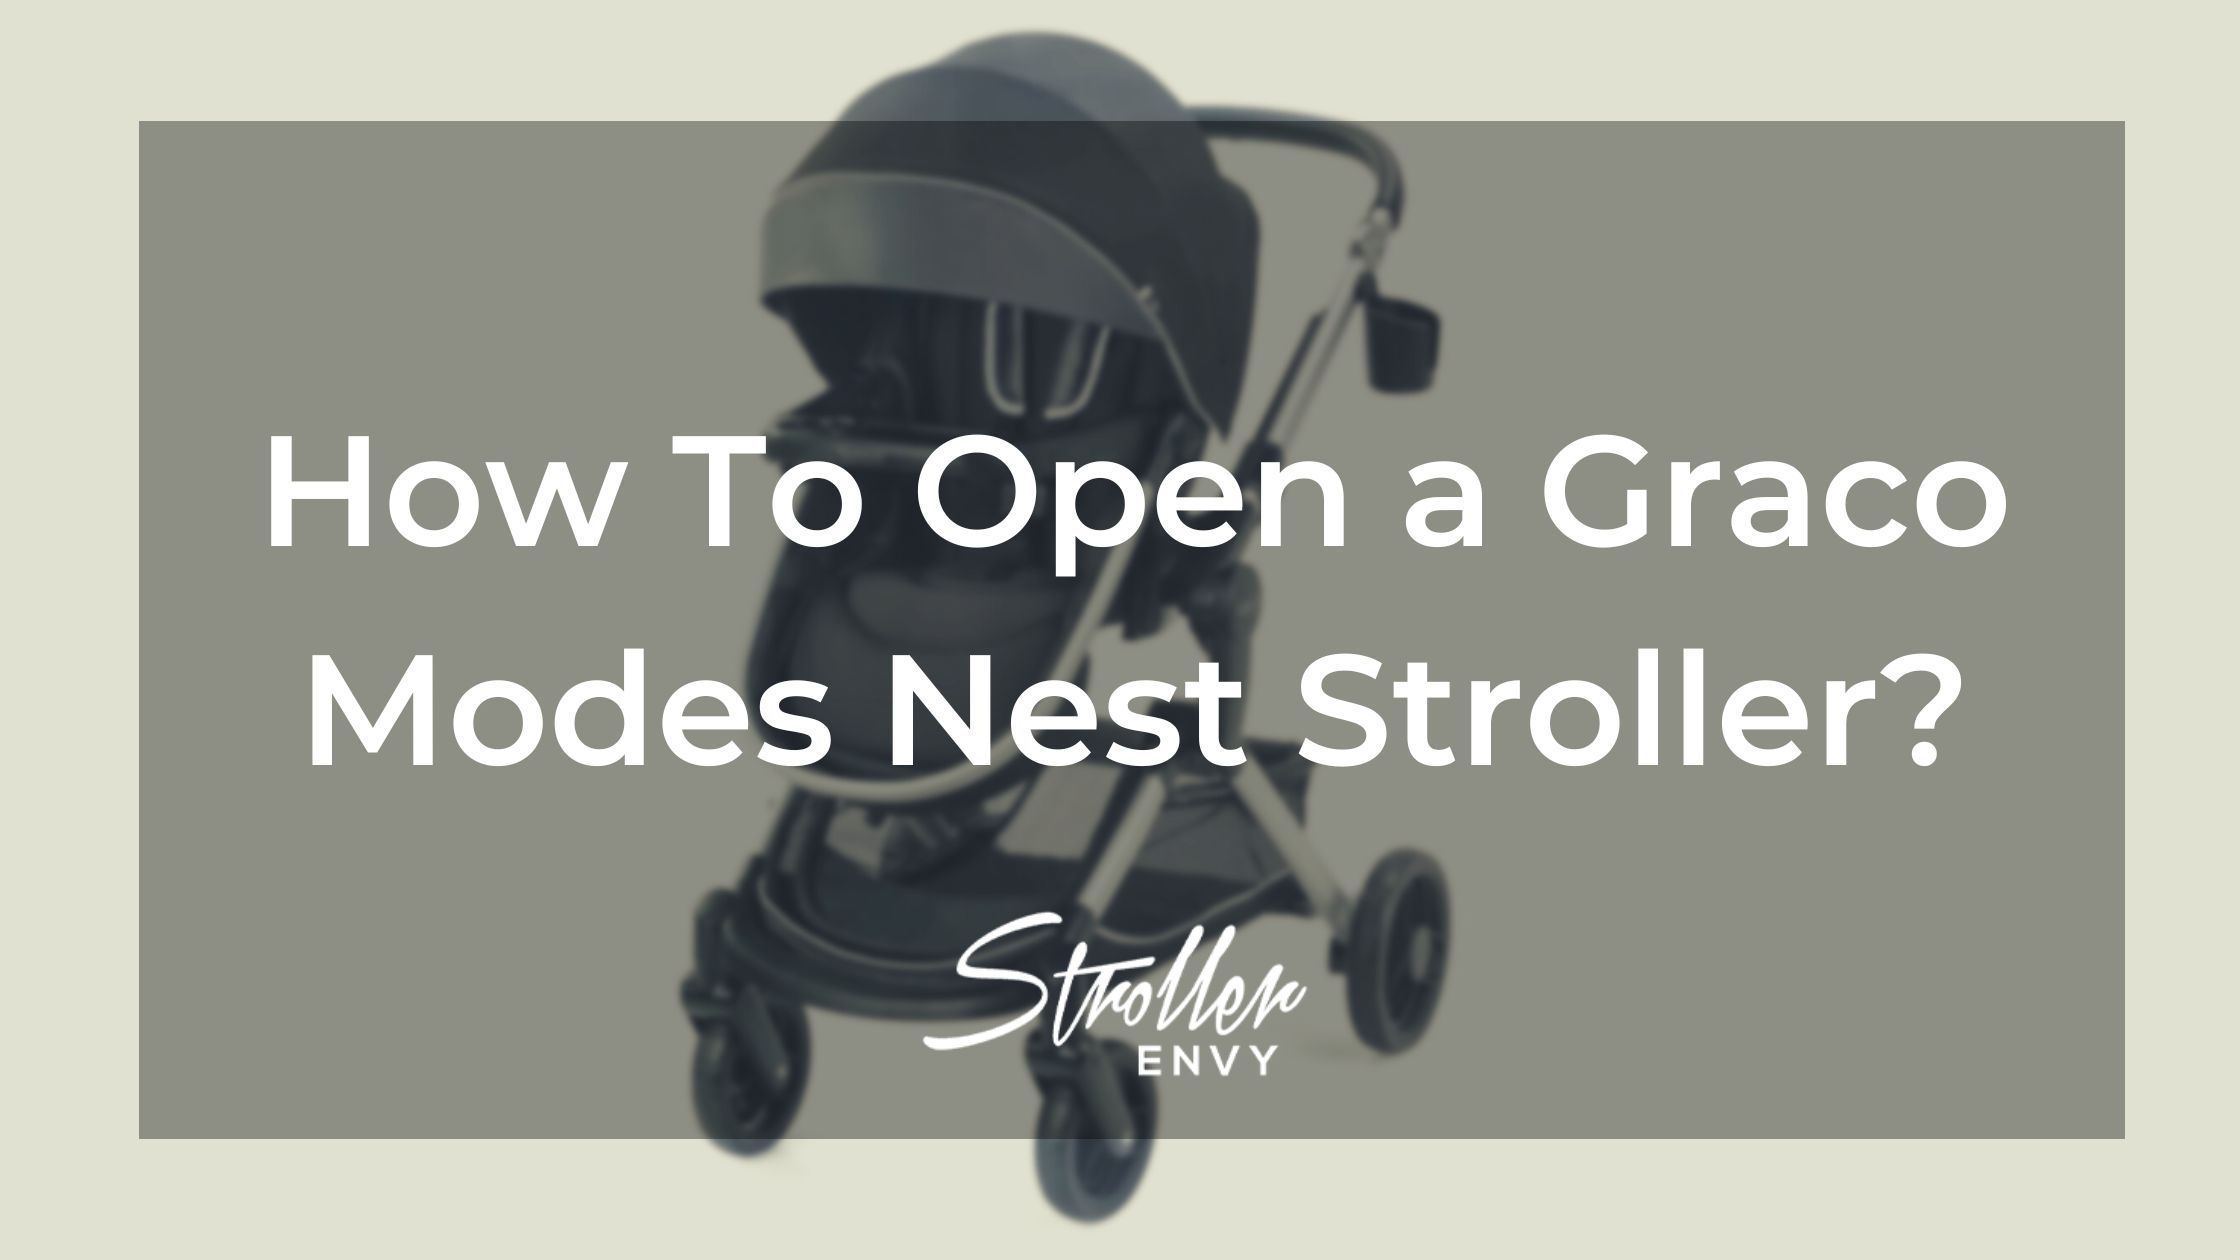 How To Open a Graco Modes Nest Stroller